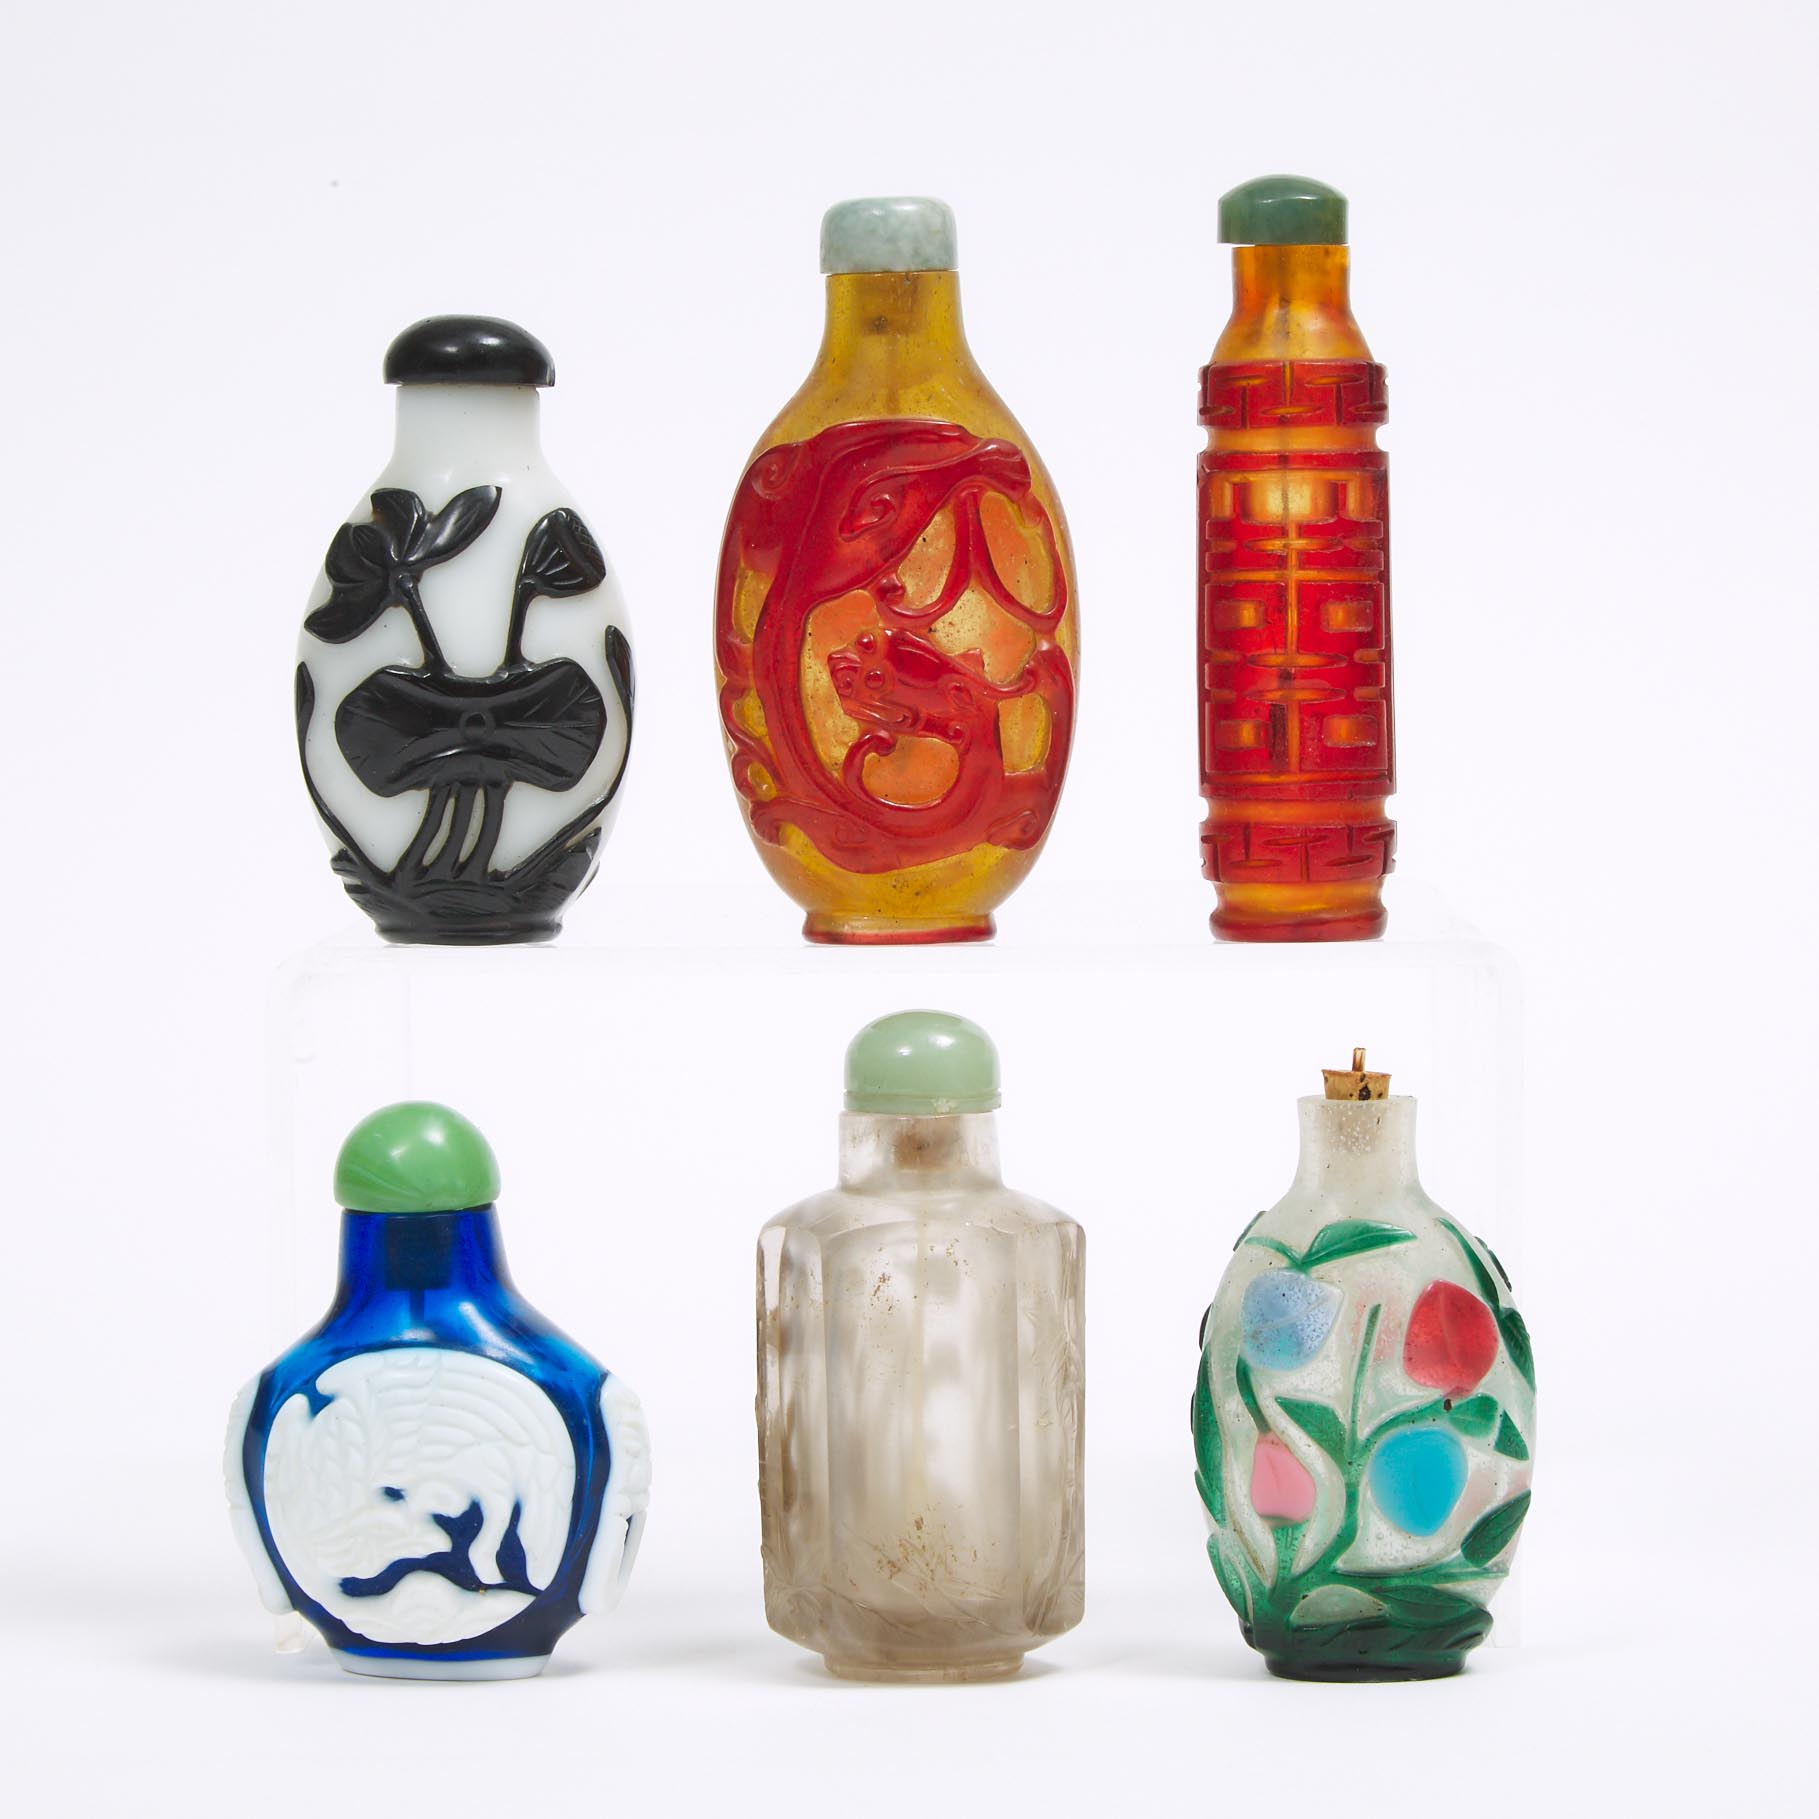 A Group of Five Overlay Glass Snuff Bottles, together with a Faceted Rock Crystal Snuff Bottle